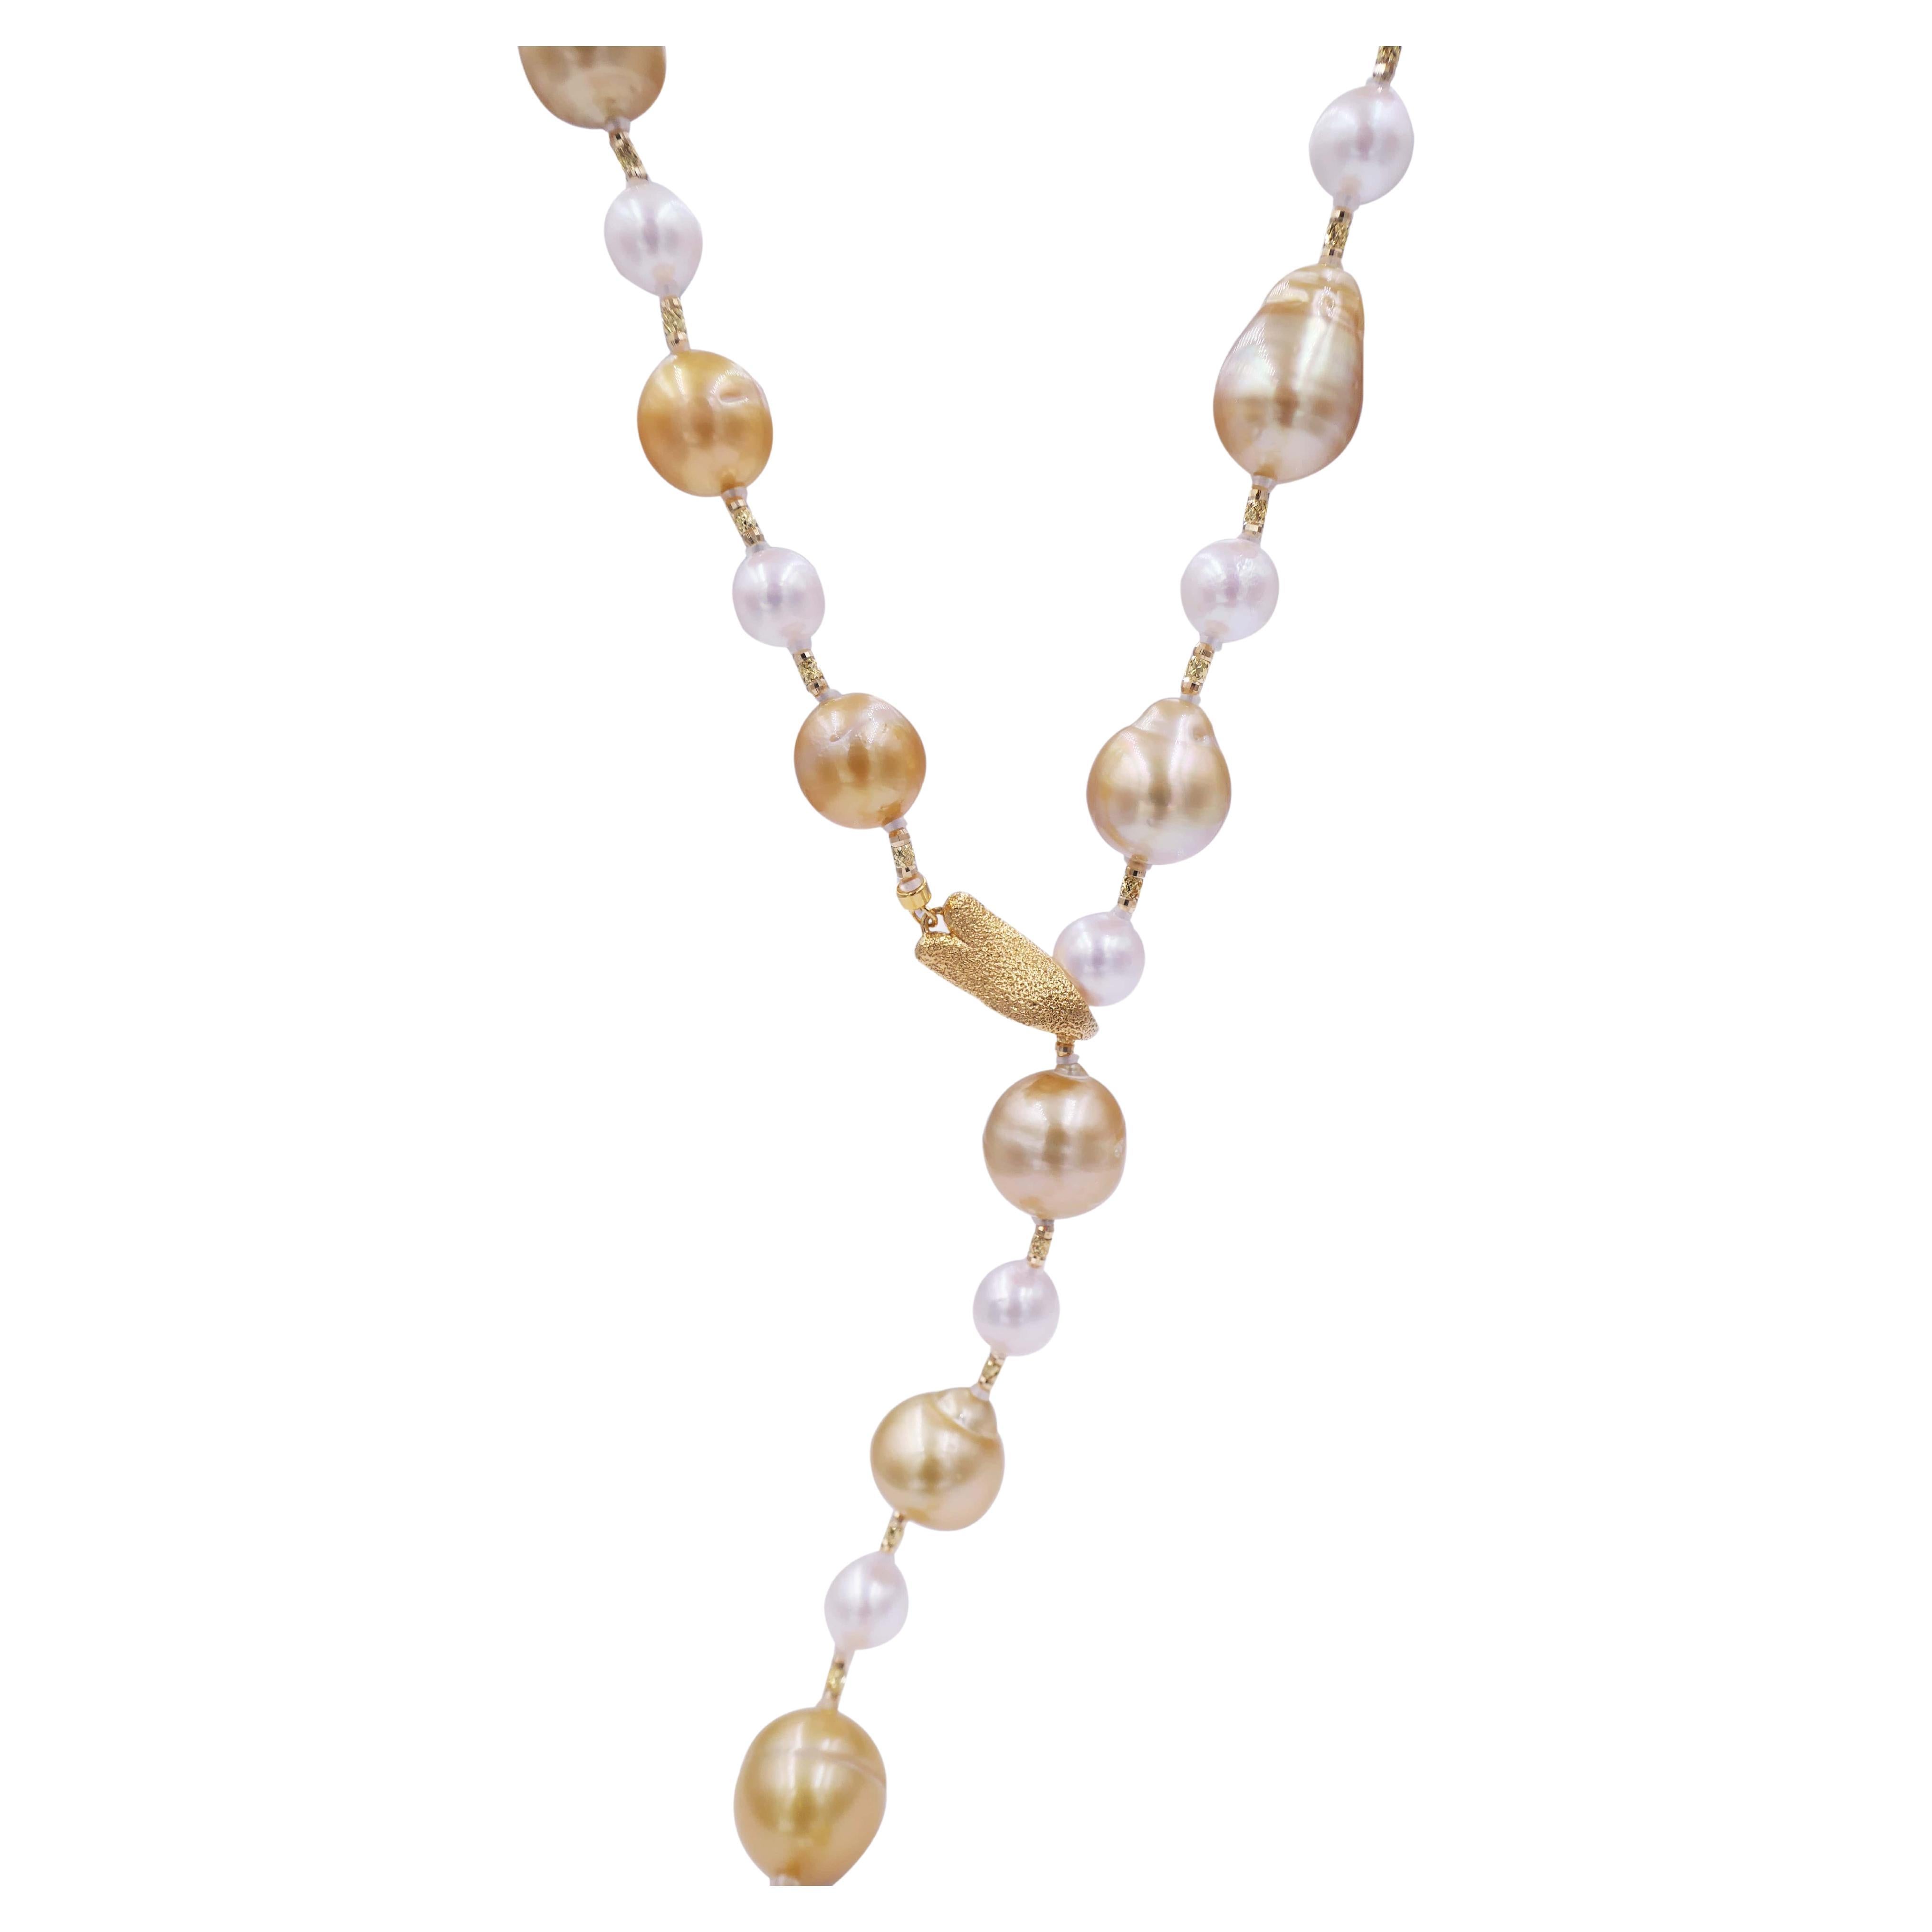 Modern Yellow Golden White South Sea Pearls 18K Gold Adjustable Lariat Clasp Necklace For Sale